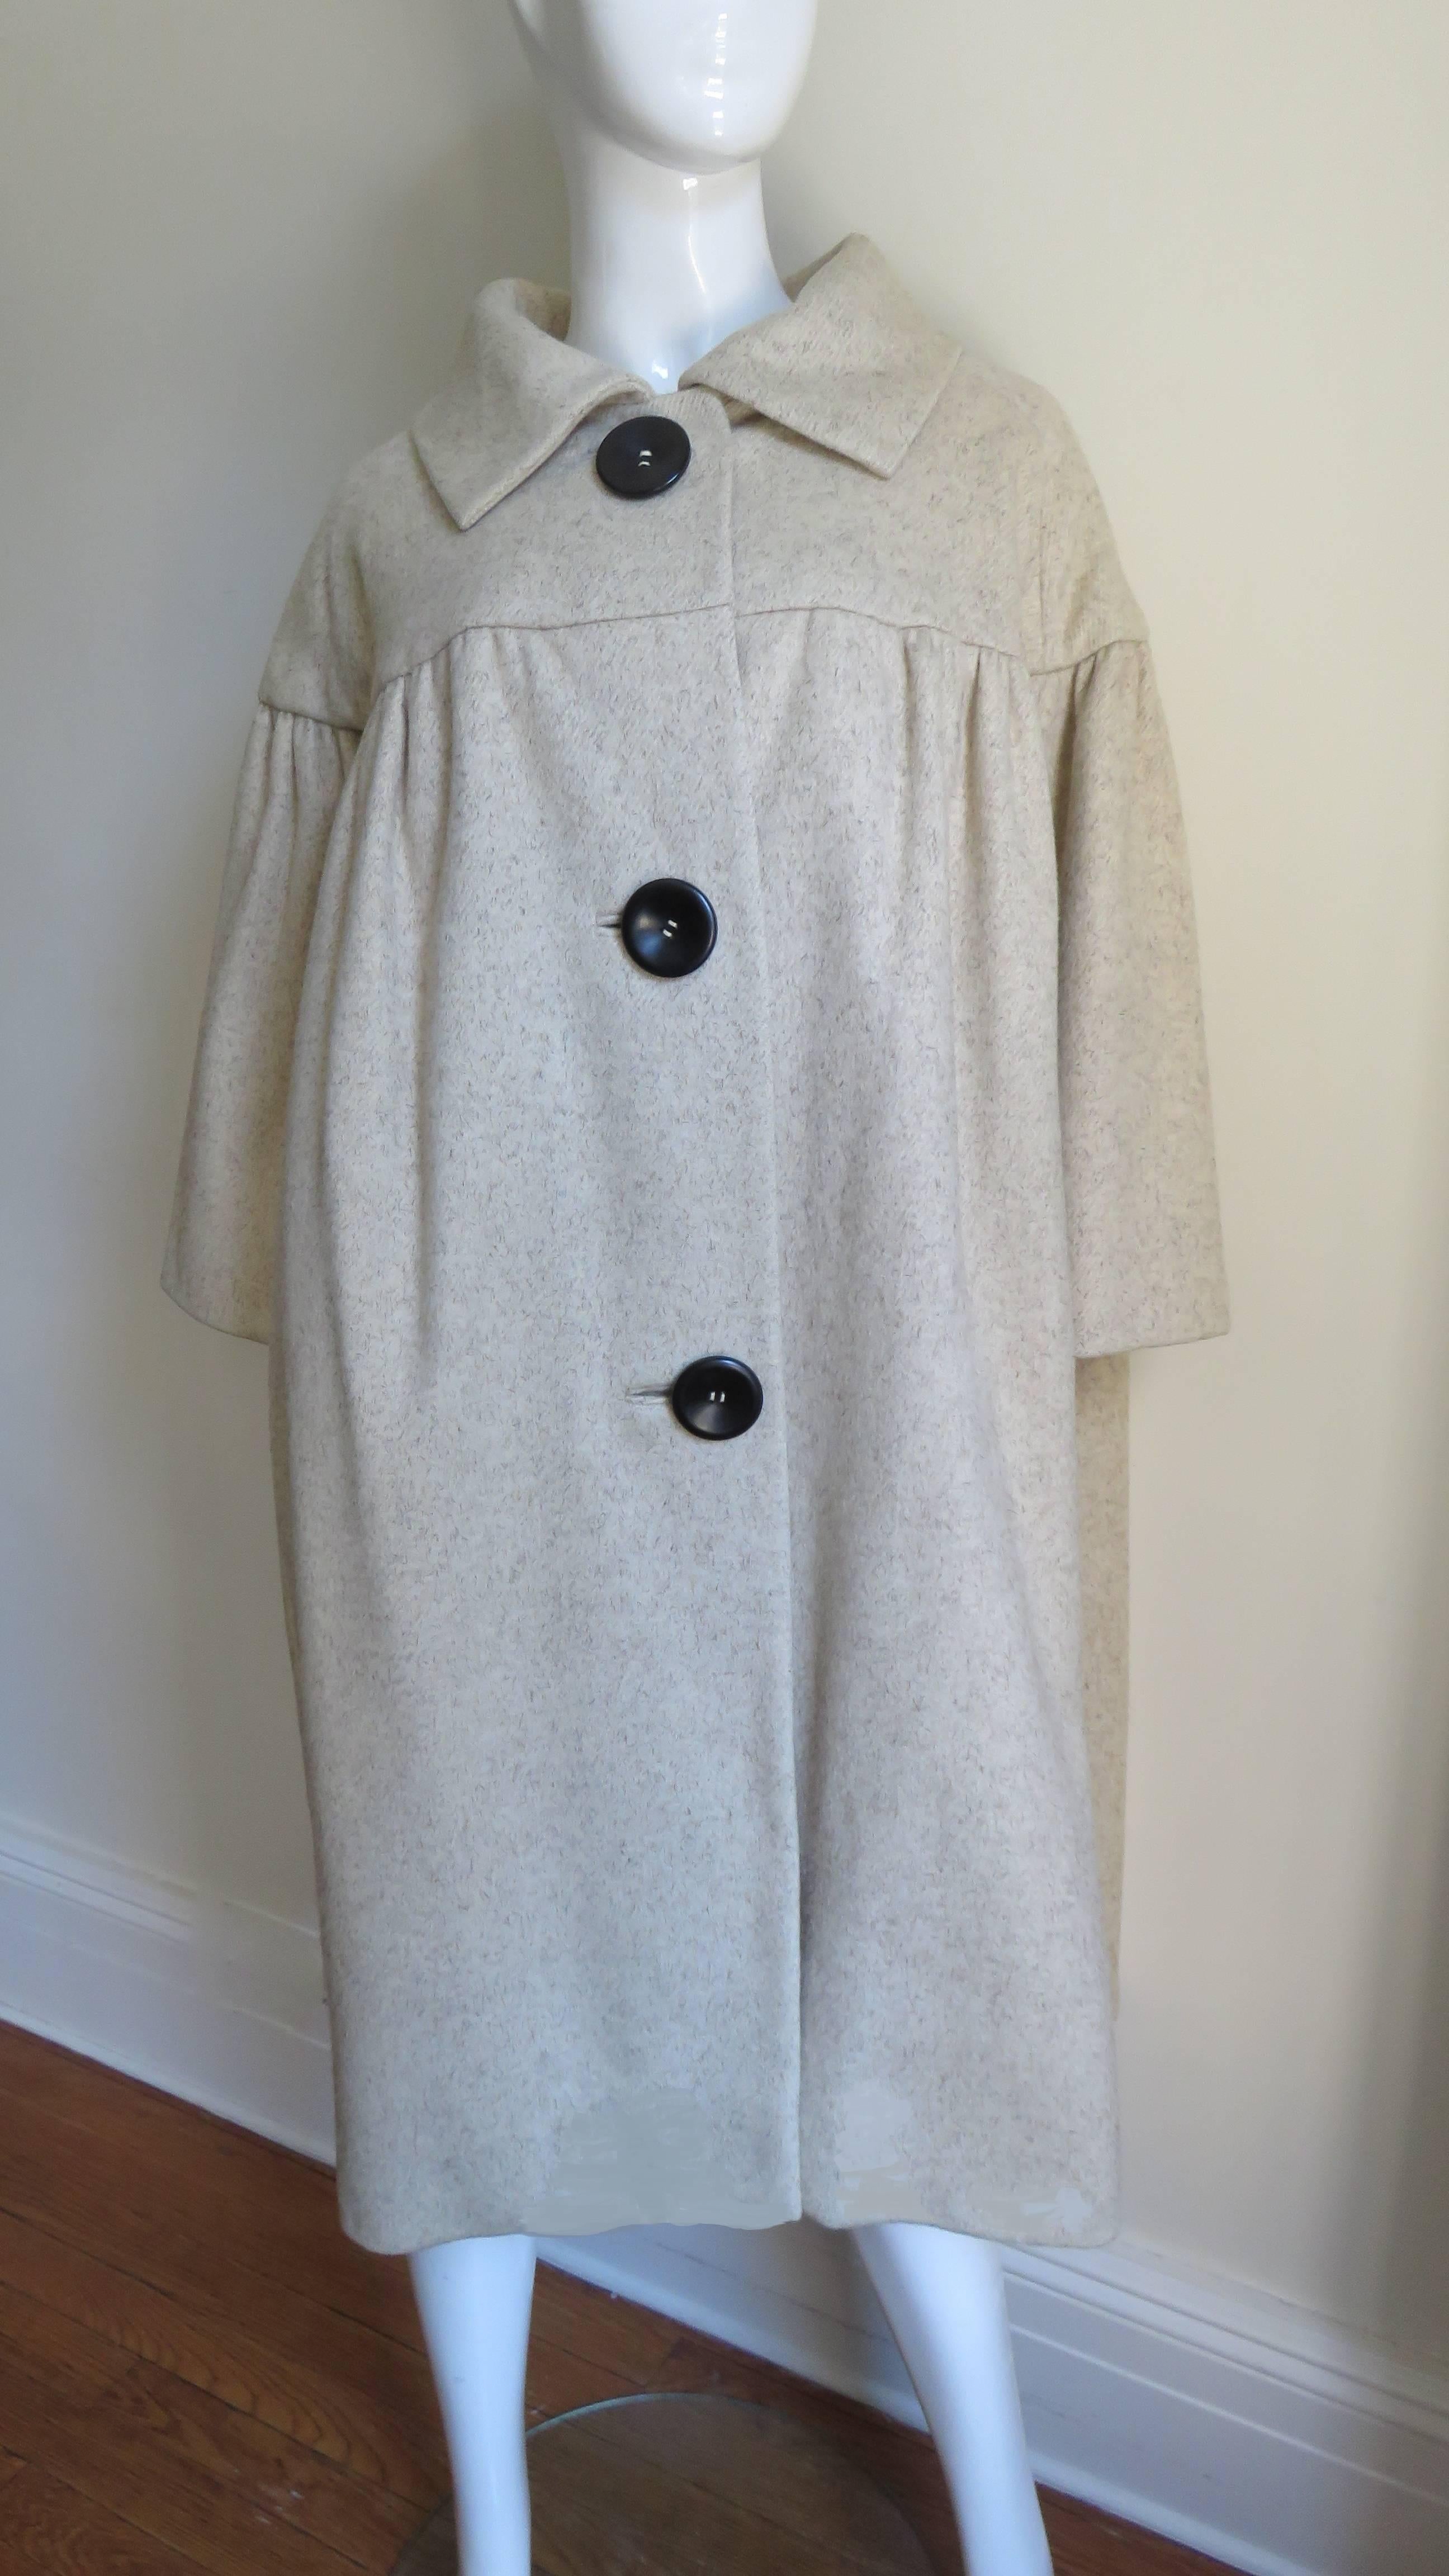 A camel hair coat created by Norman Norell the designer behind the collaboration of Traina-Norell label. The 5 panel body of the coat and the 3/4 length sleeves are gathered onto the yoke front, and back.  There are 3 front bound buttonholes with 3